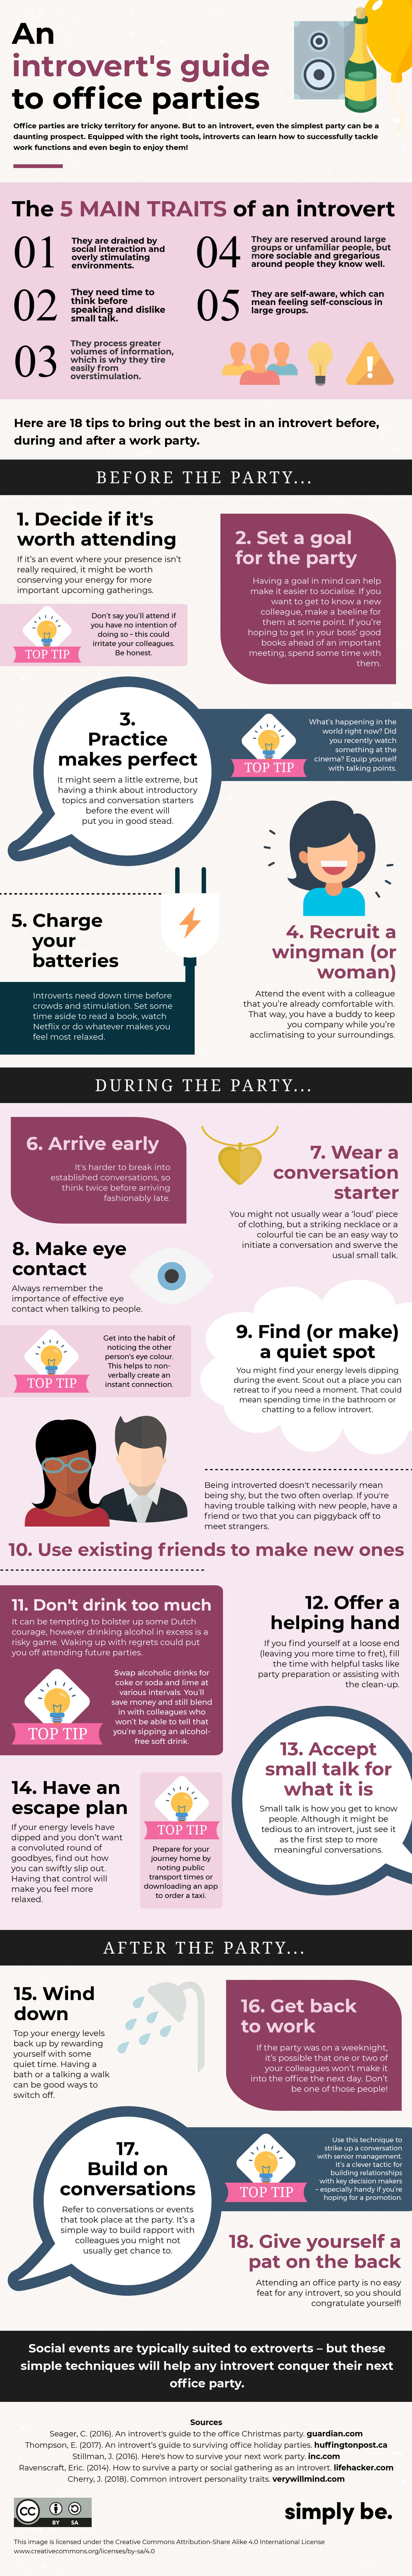 Office Party for Introverts Infographic